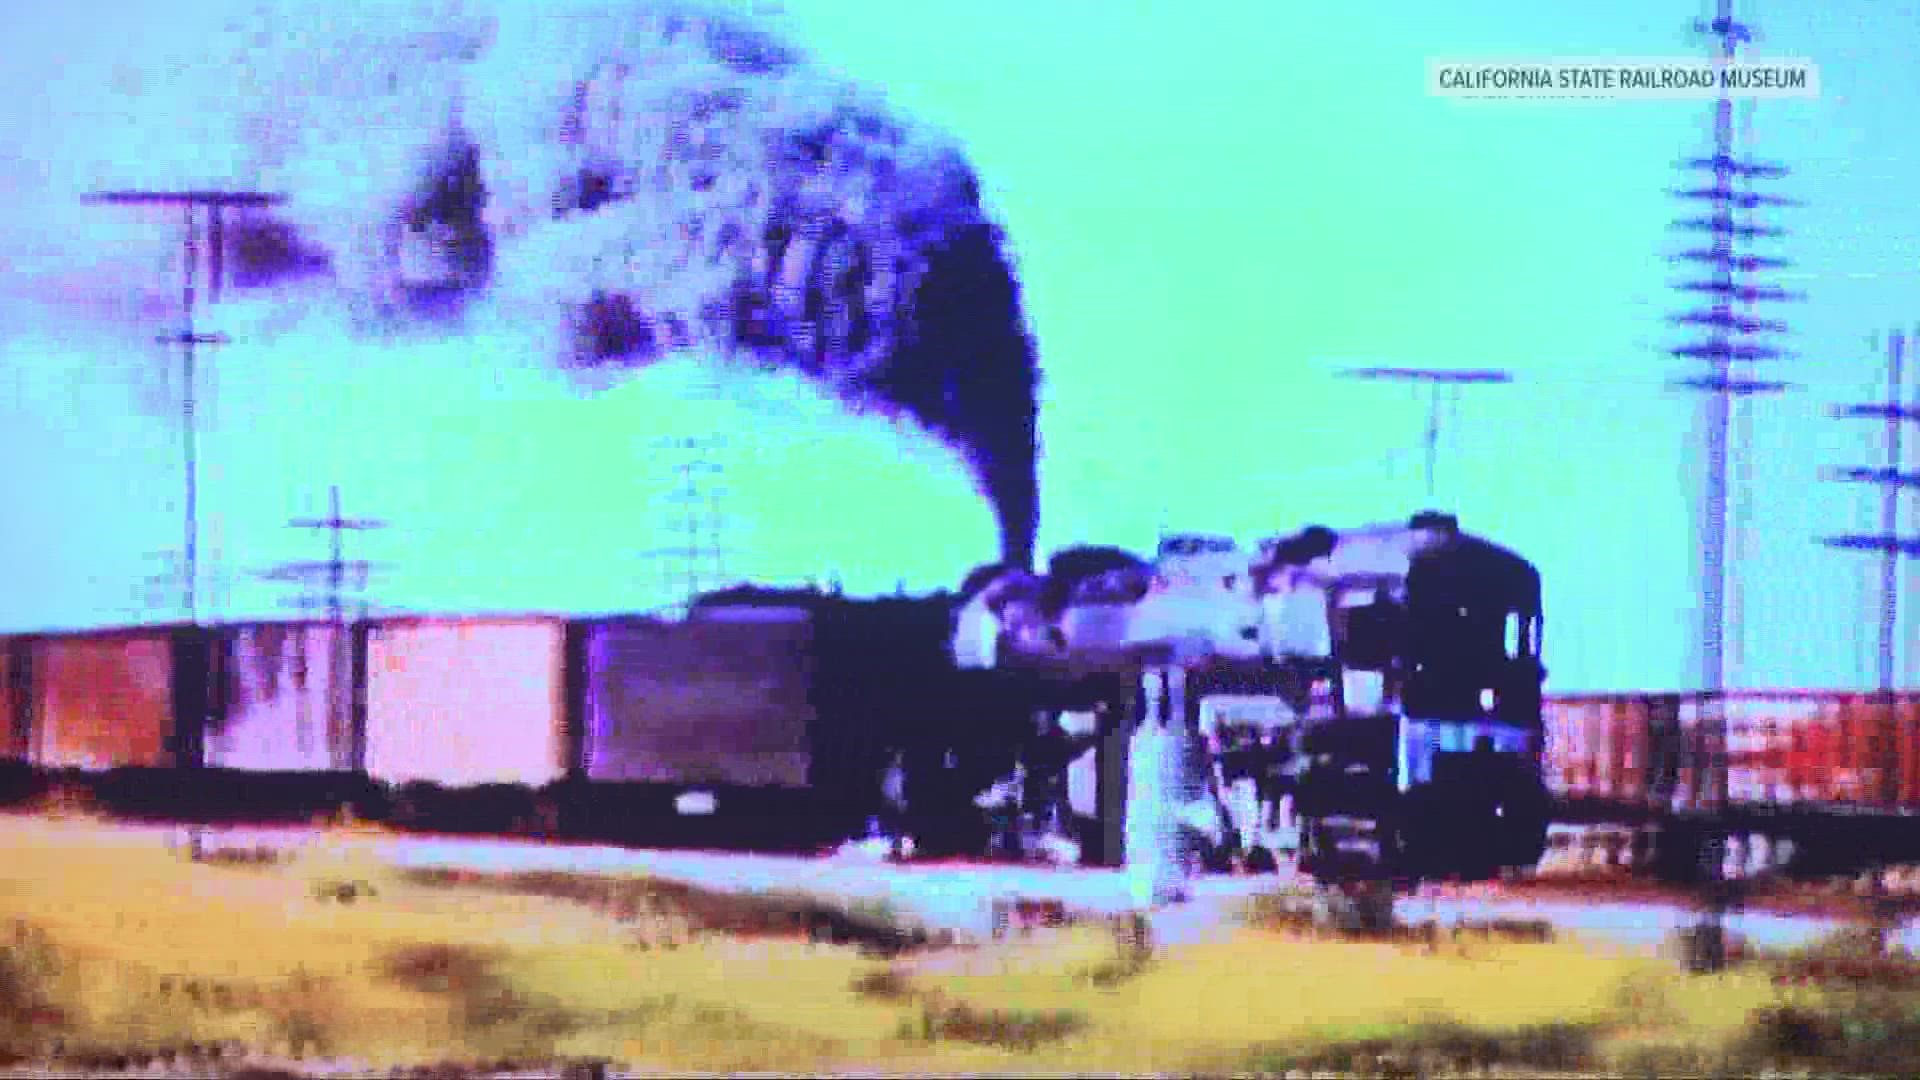 ABC10 spoke with the California State Railroad Museum about the "Crossing Lines: Women of the American Railroad" exhibit and the women who made history.